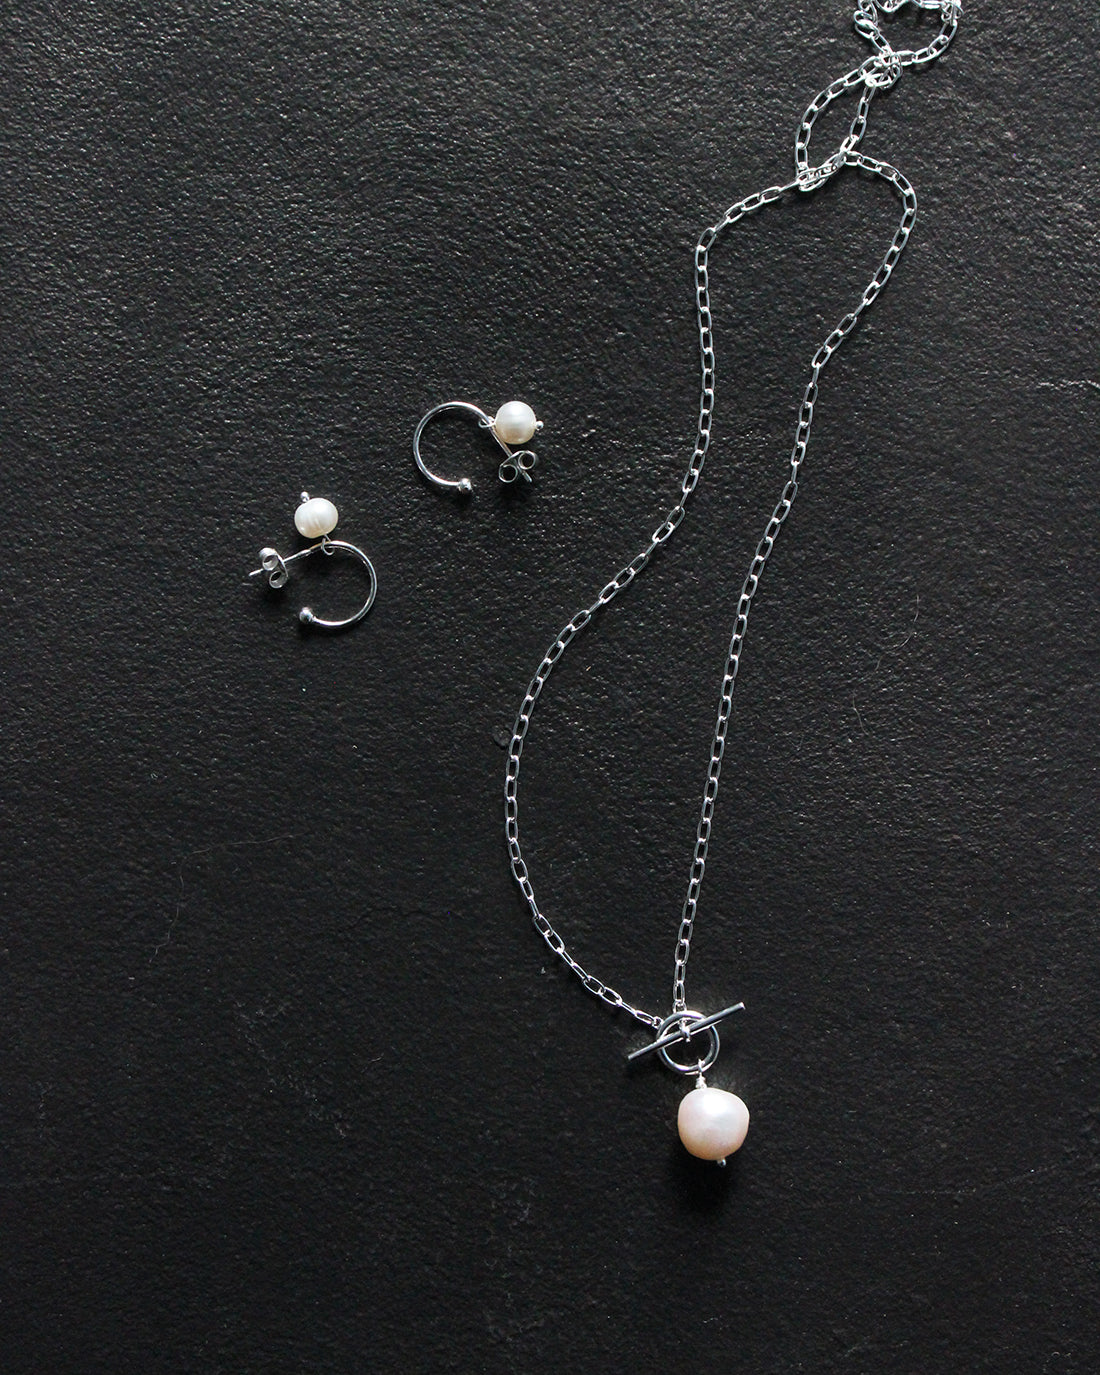 All About: Pearls